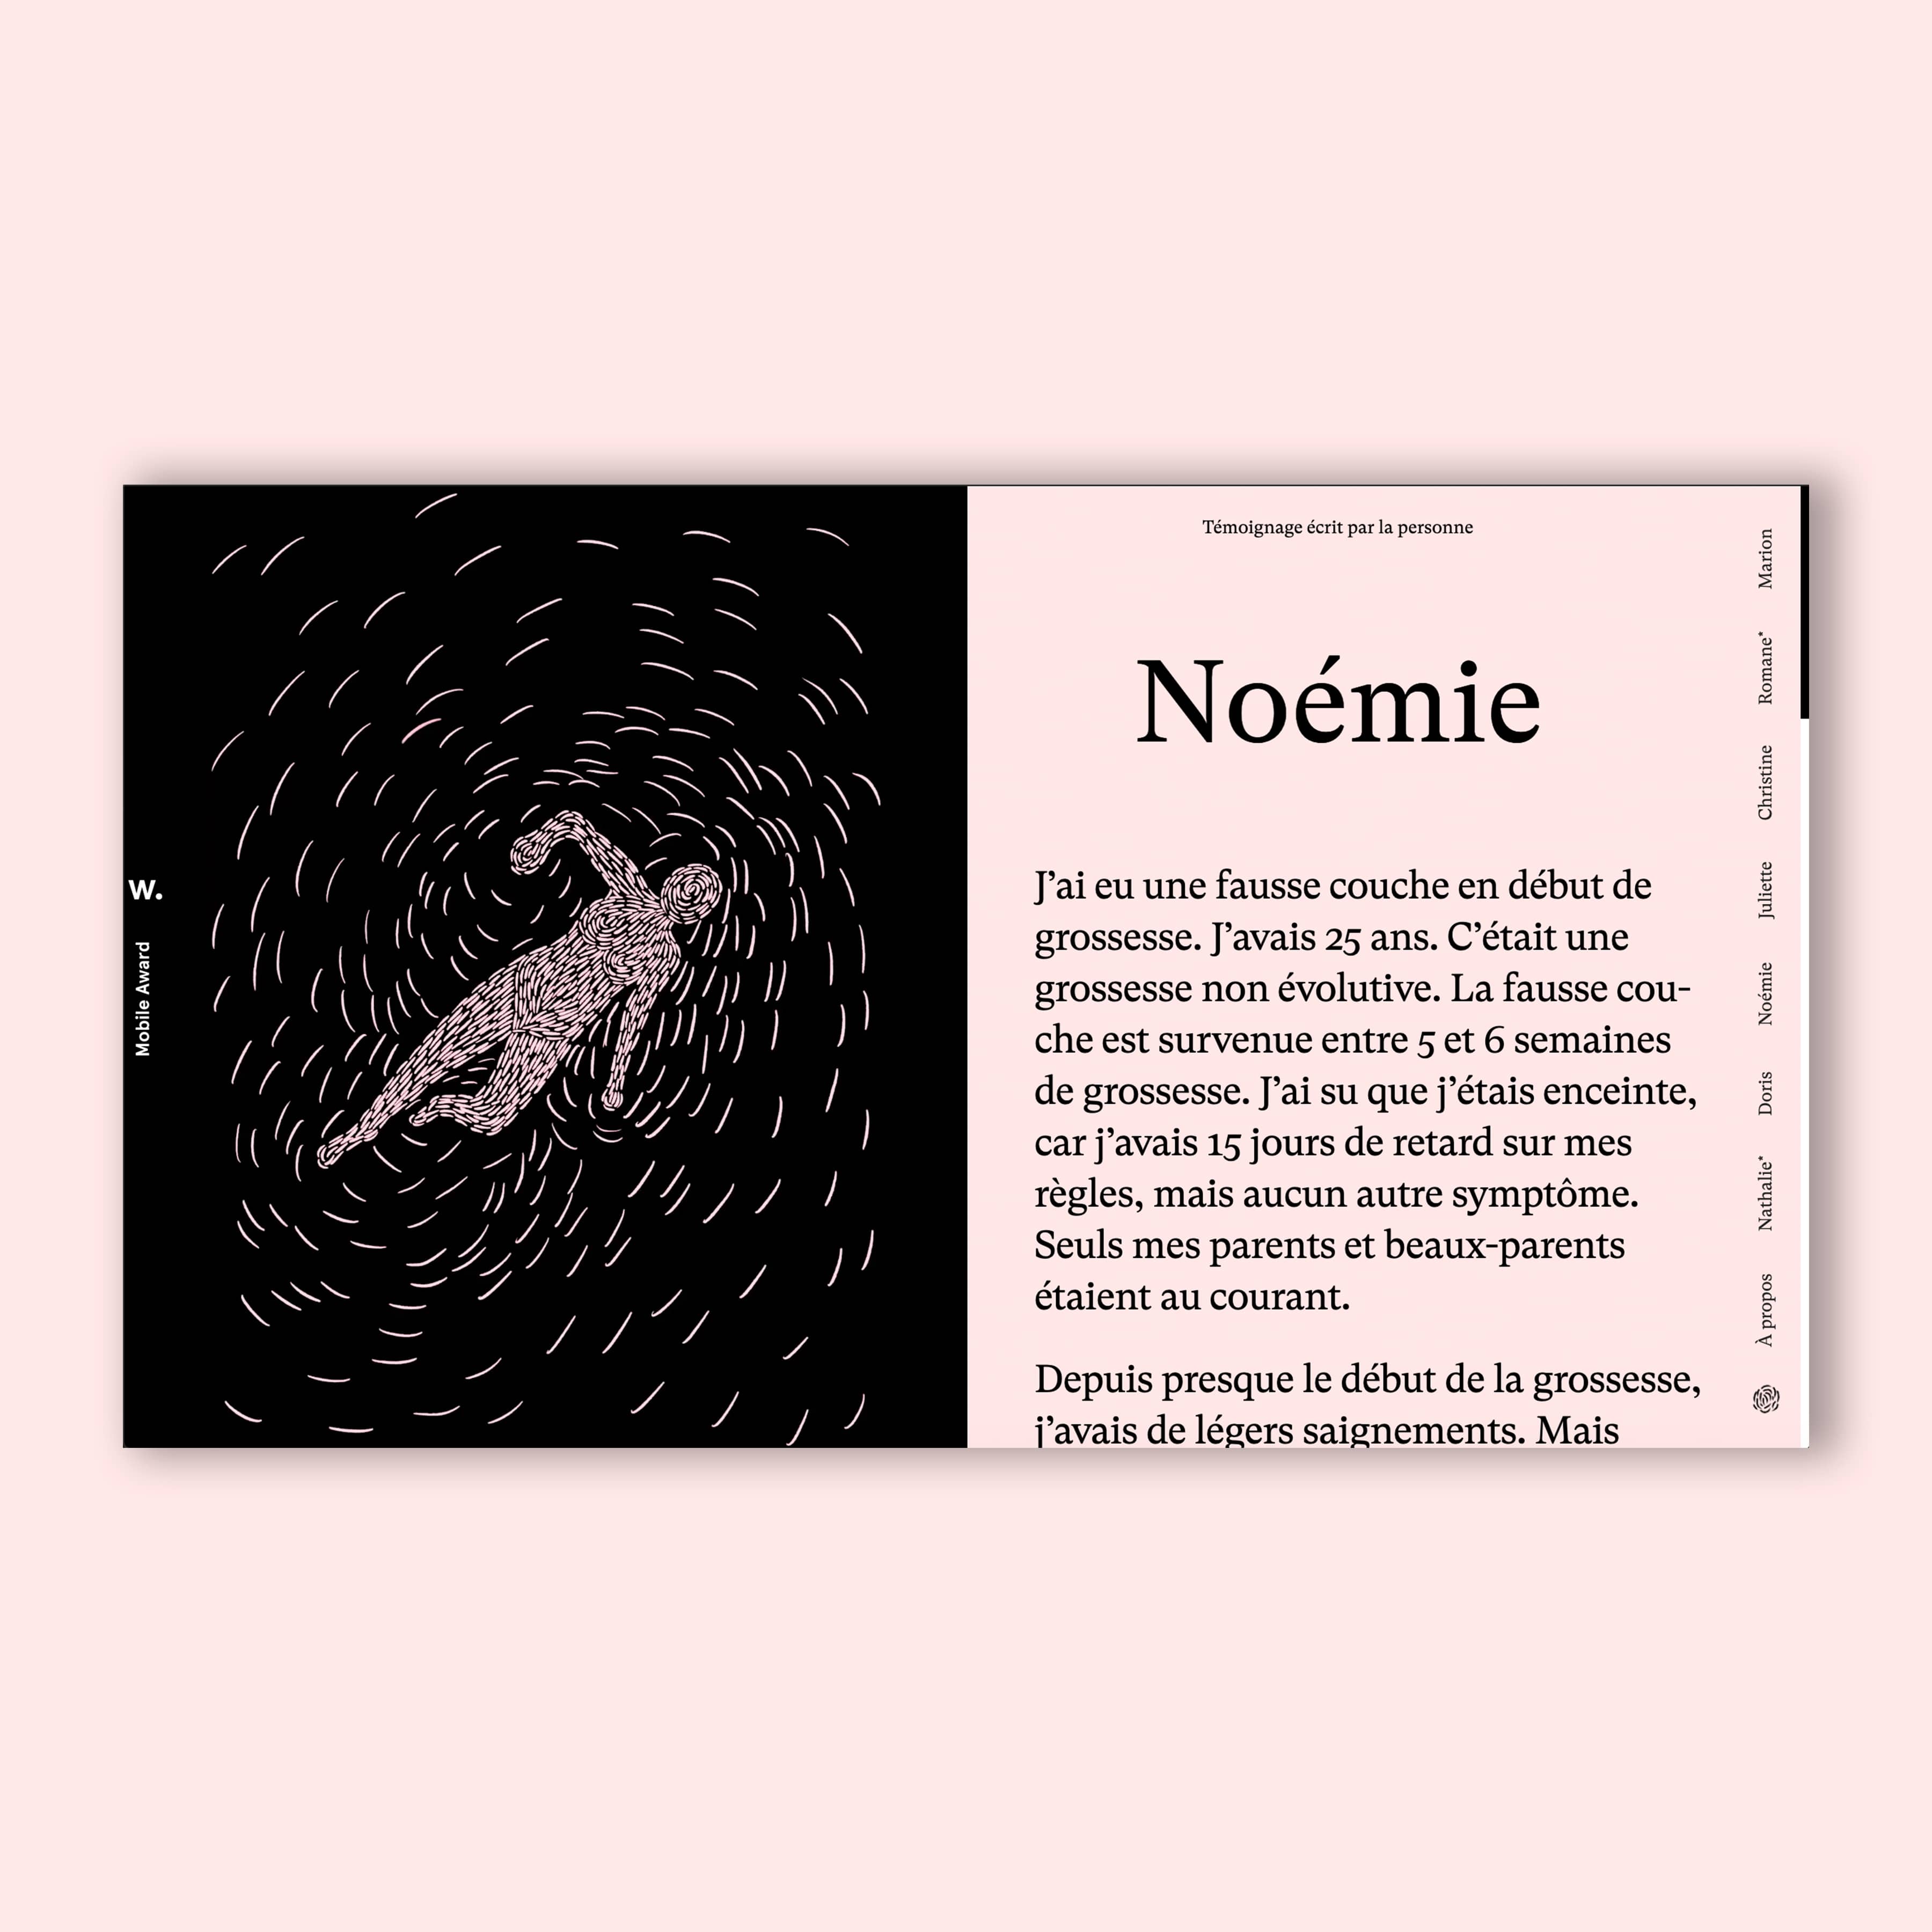 Page of the interview of Noémie.